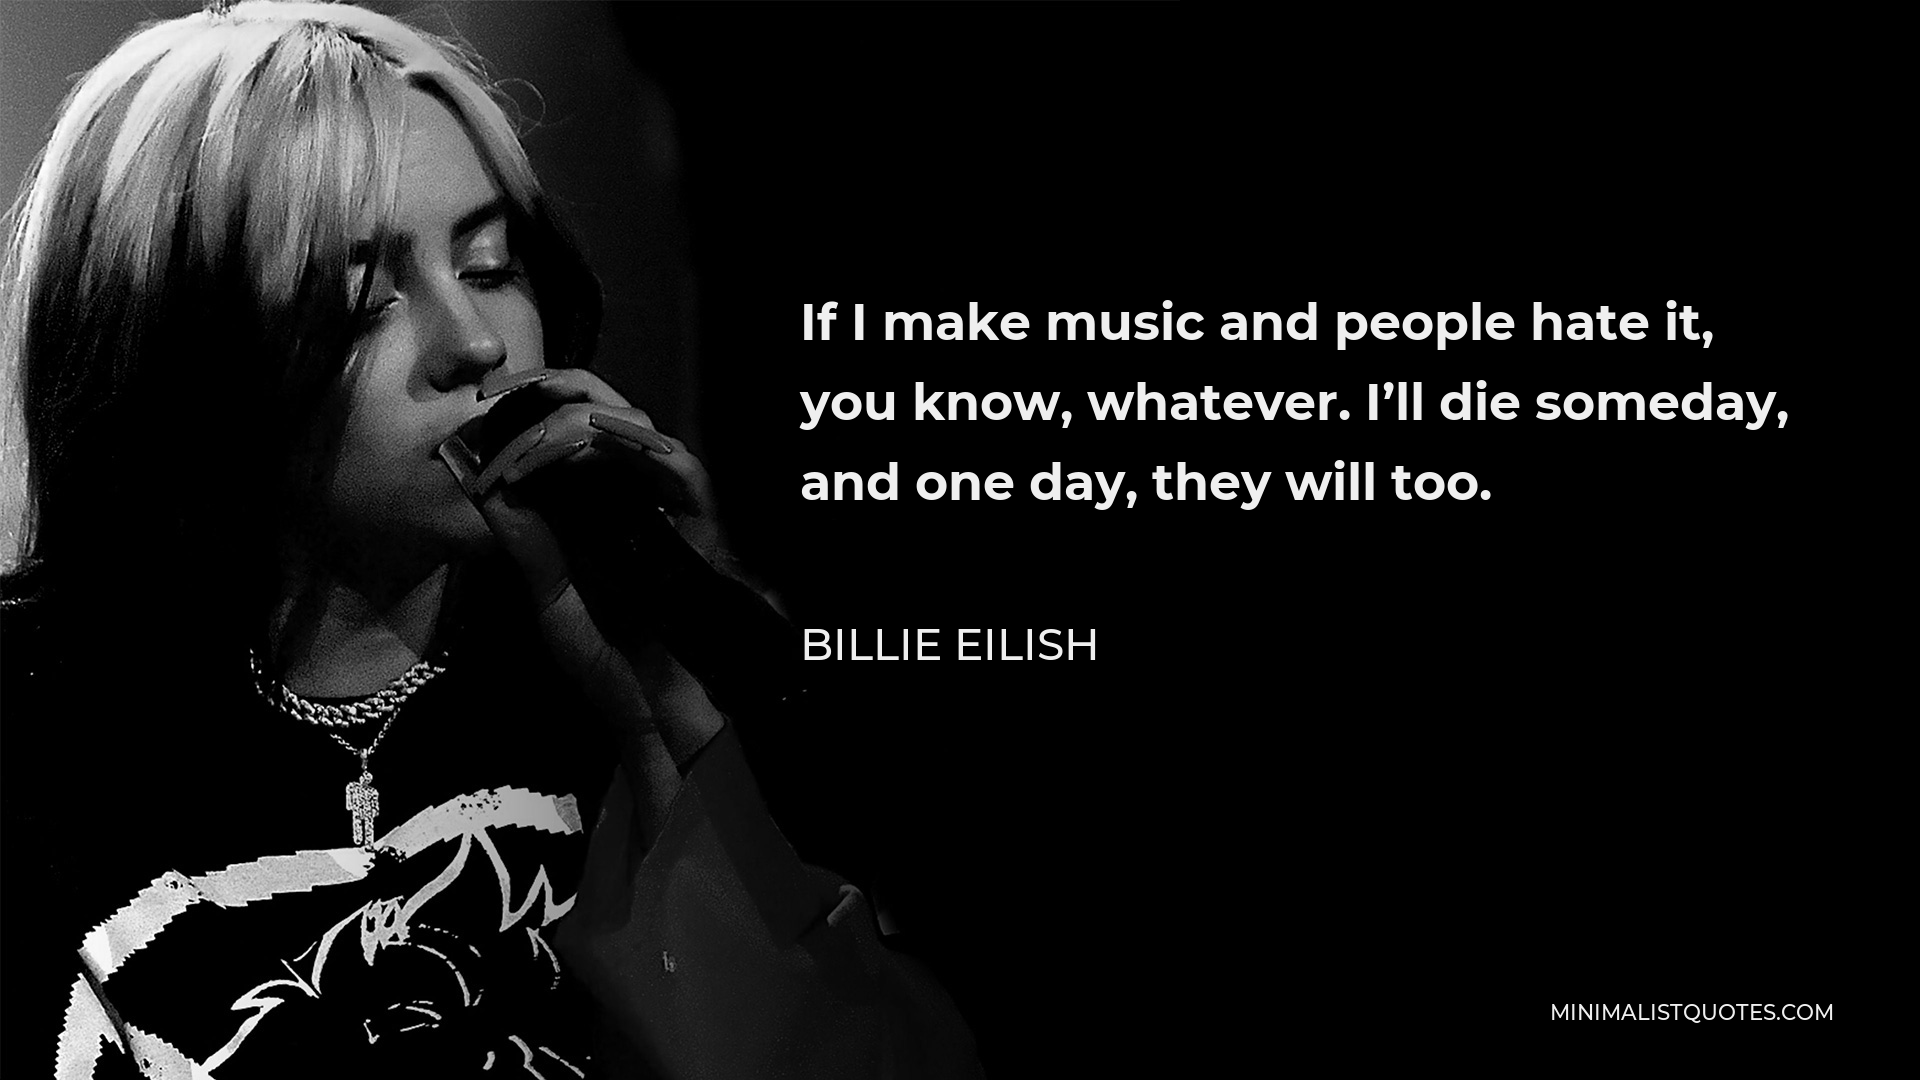 Billie Eilish Quote - If I make music and people hate it, you know, whatever. I’ll die someday, and one day, they will too.